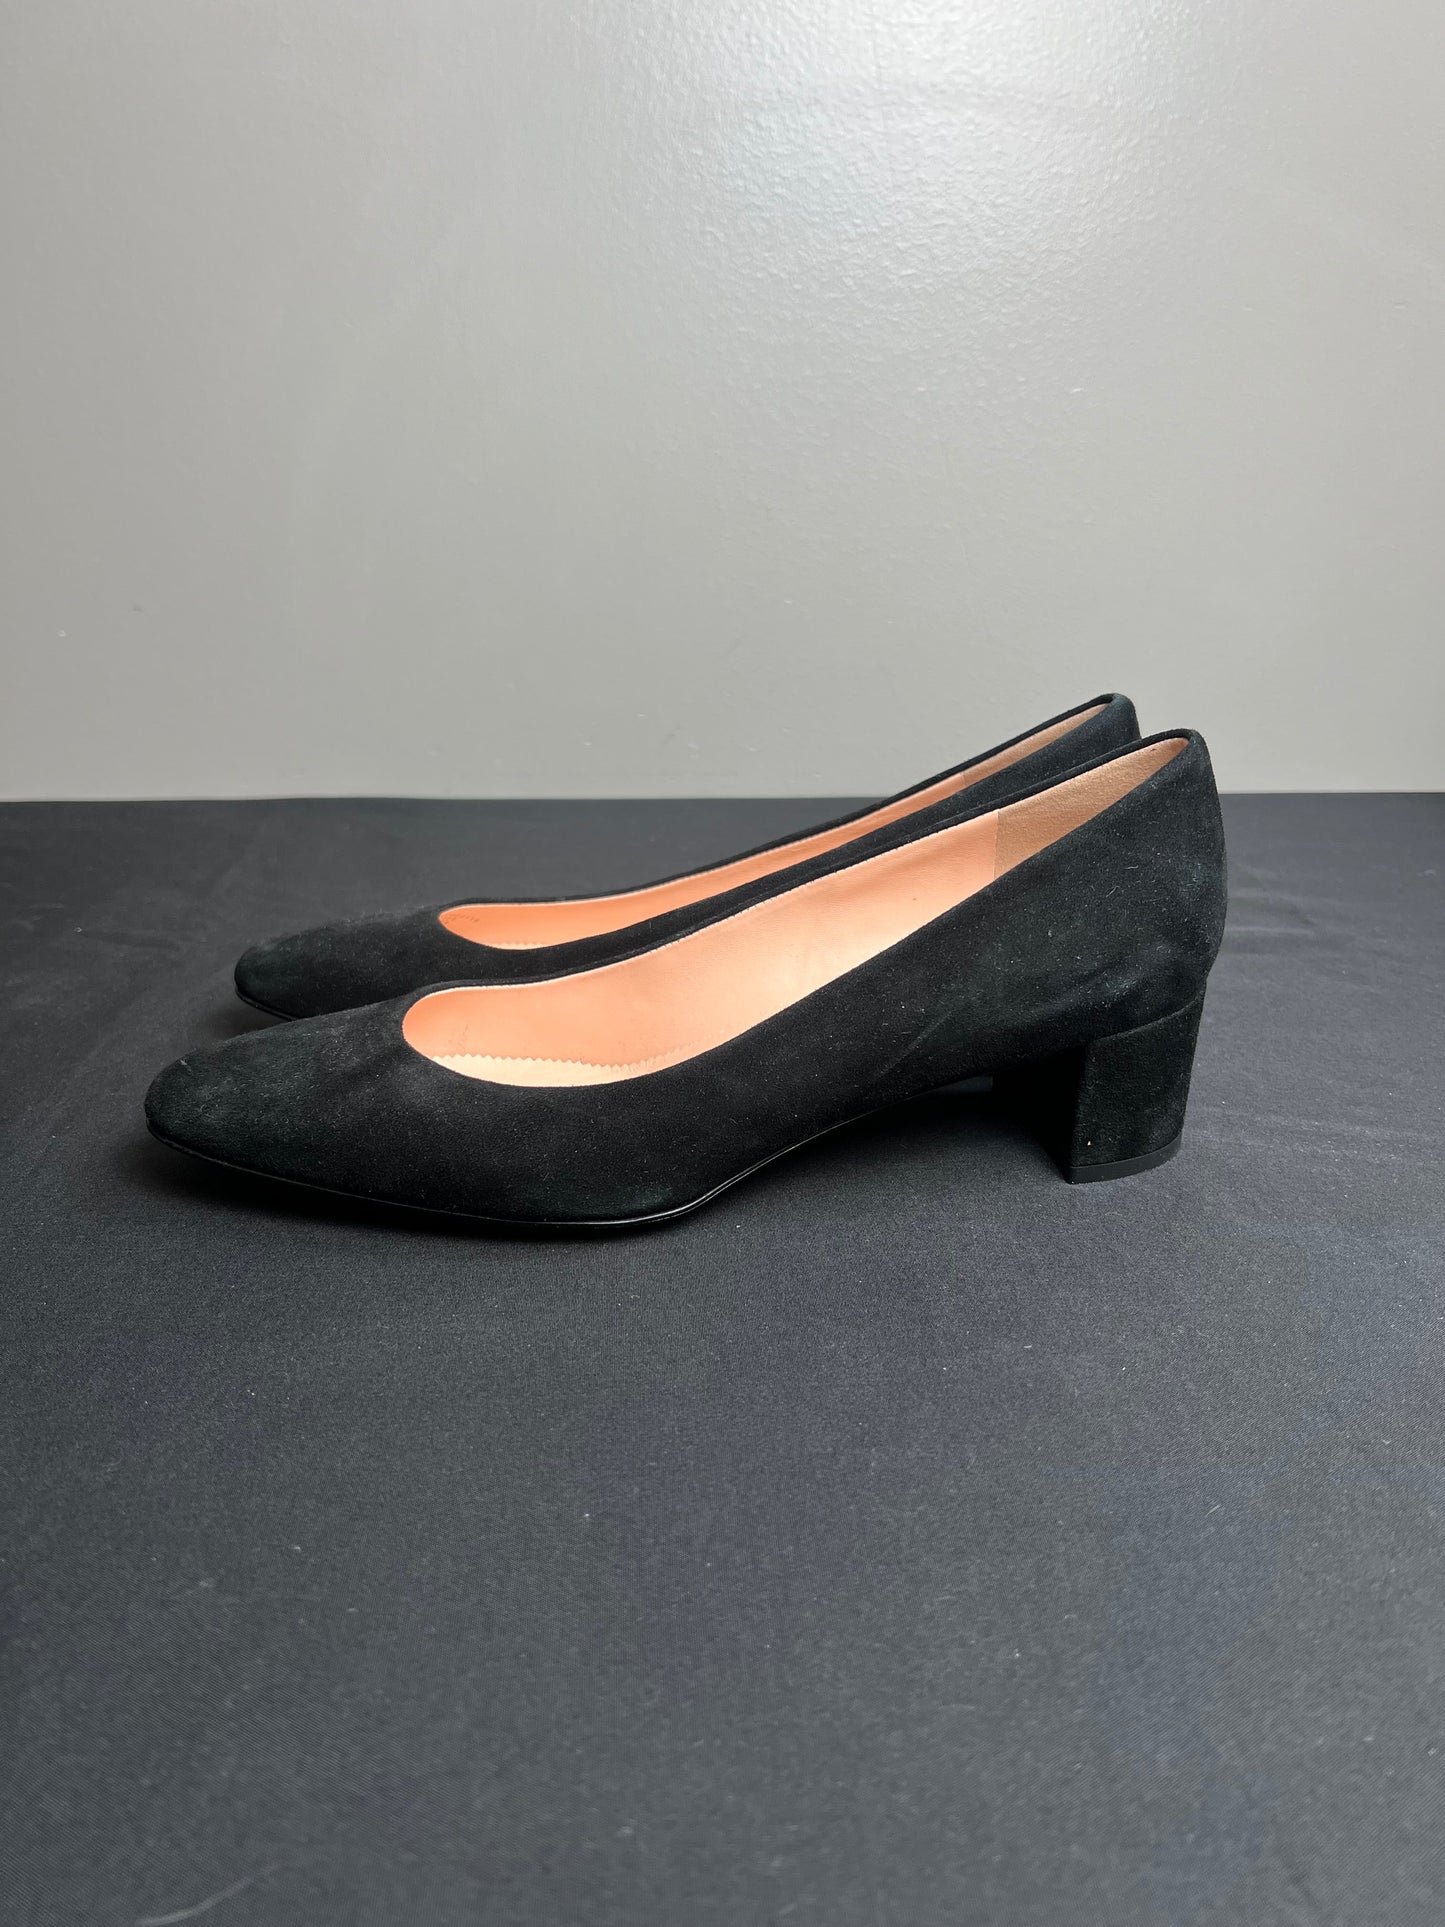 Shoes Heels Block By J Crew  Size: 10.5